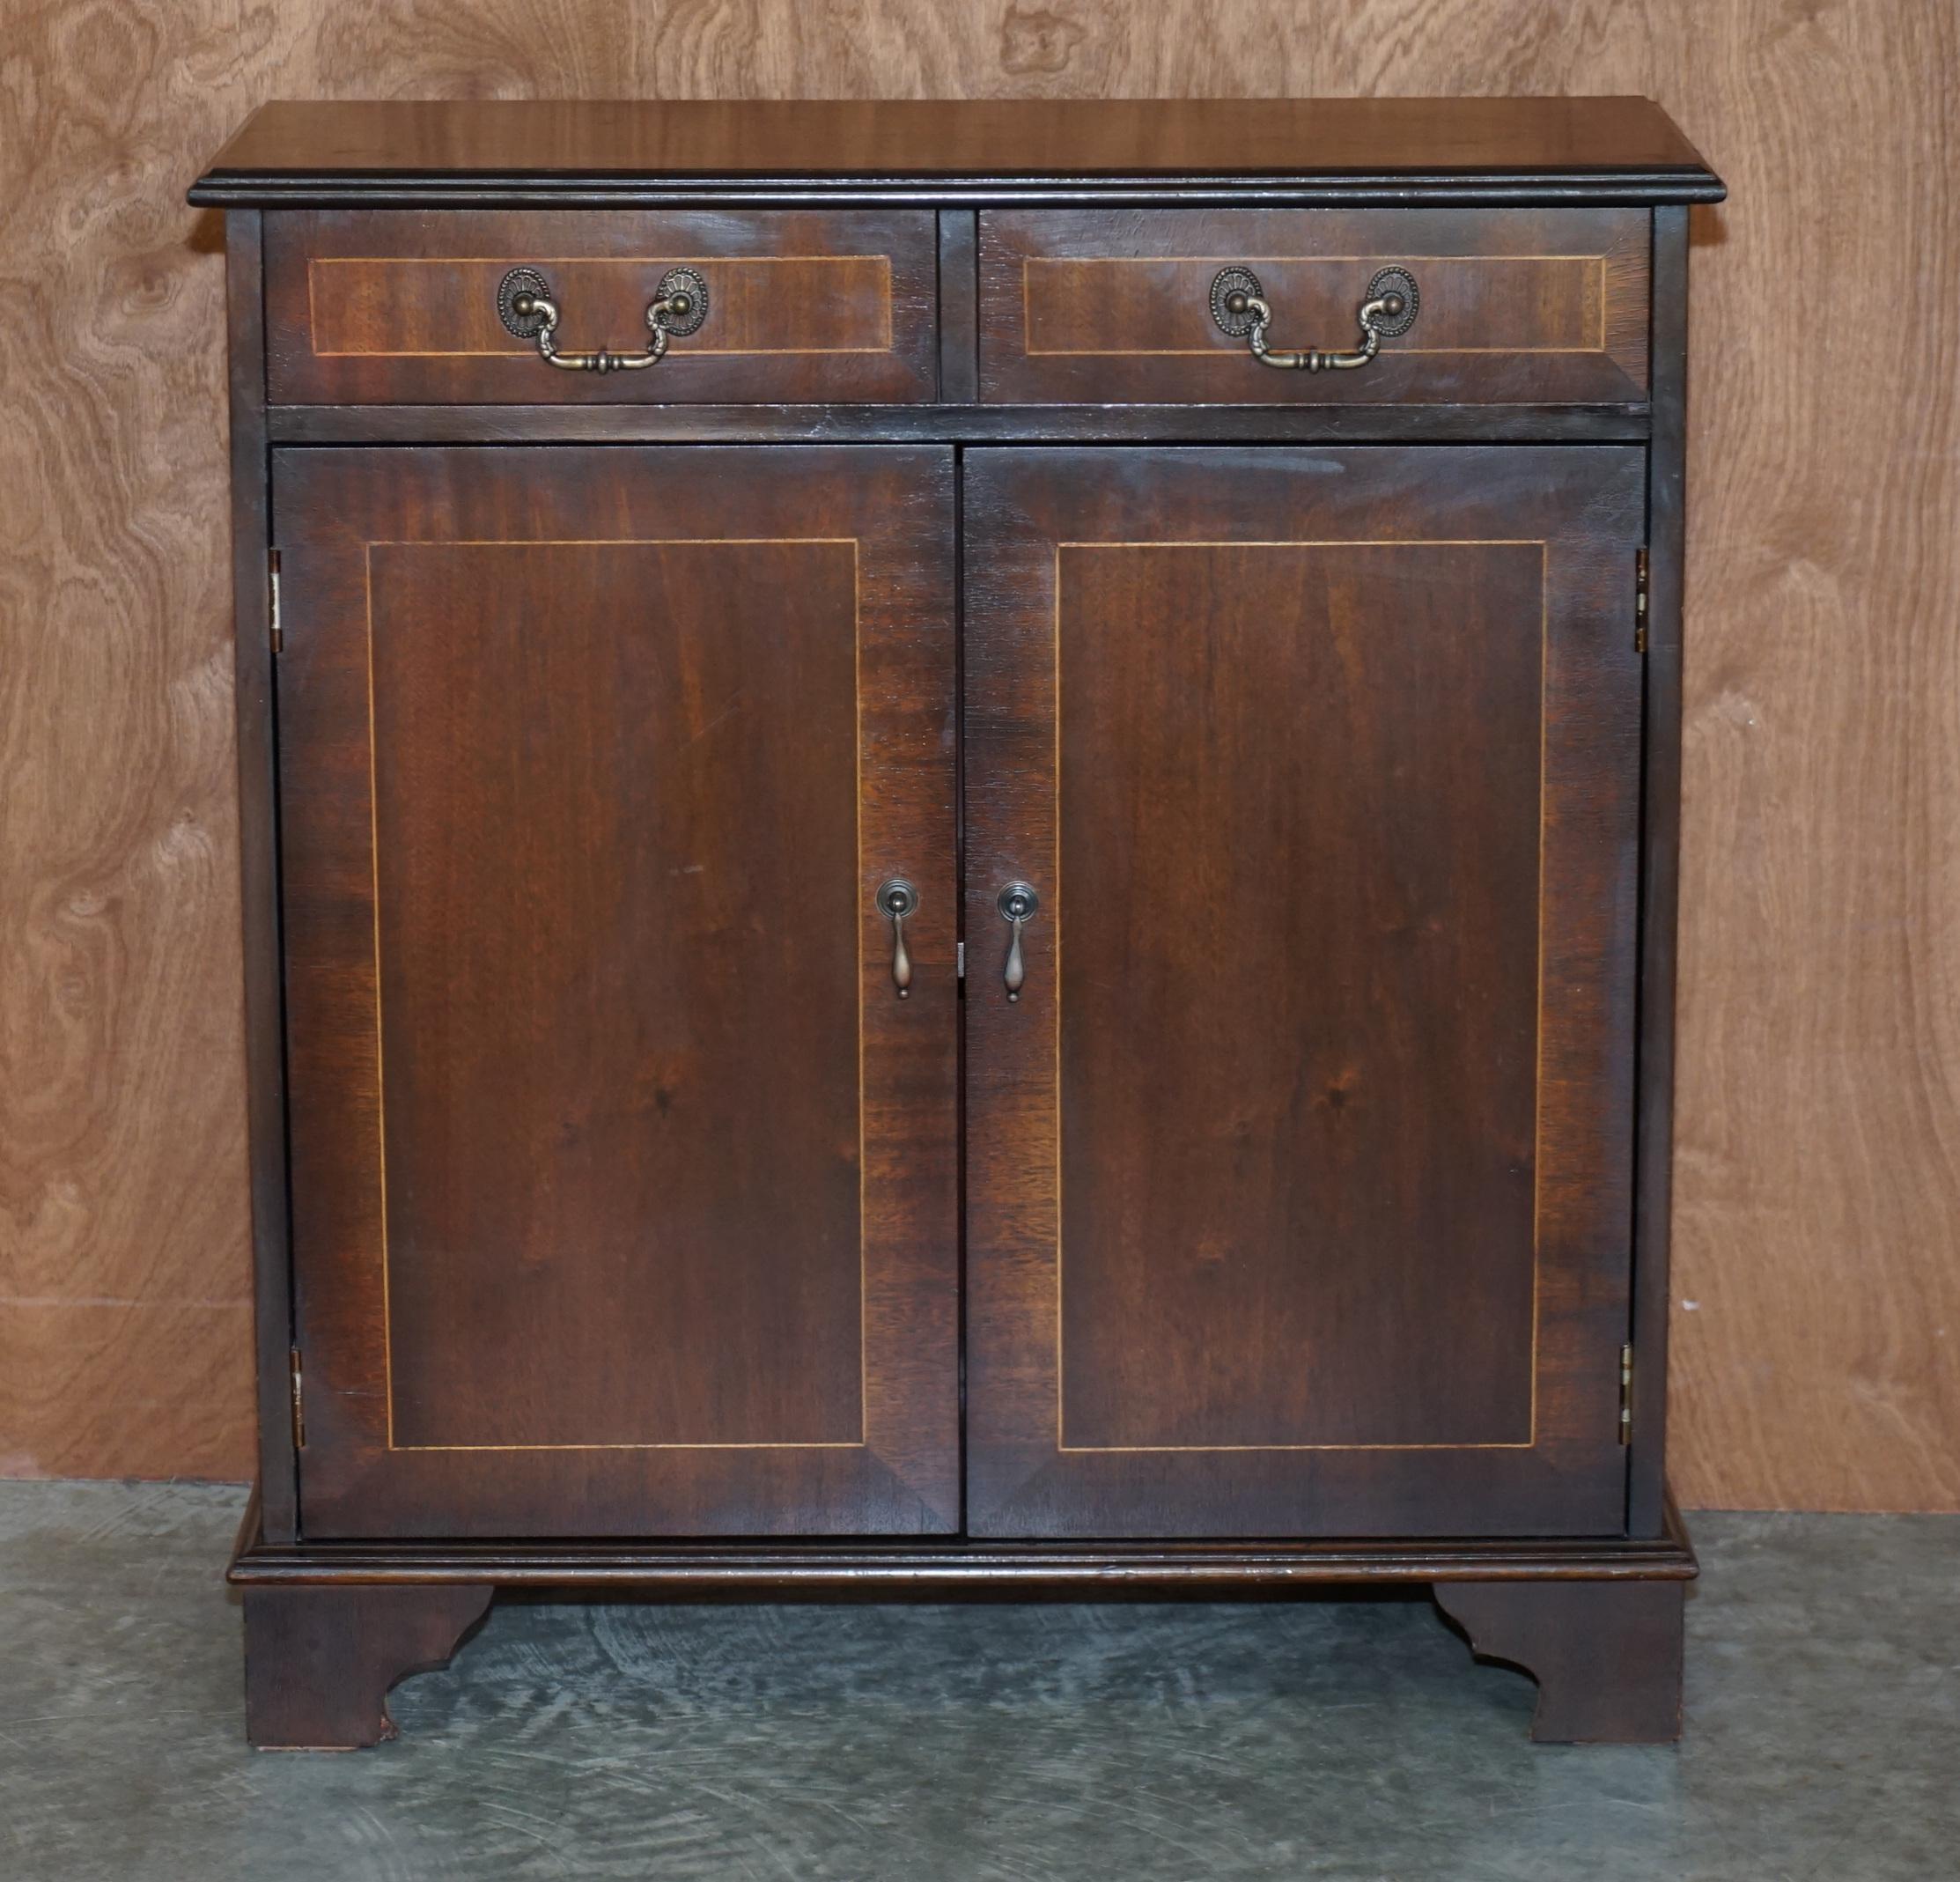 We are delighted to offer for sale this lovely hand made in England vintage mahogany open library bookcase with twin drawers

This piece is in good used condition, the drawers run smoothly. The frame is a mixed hardwood frame with luxury premium